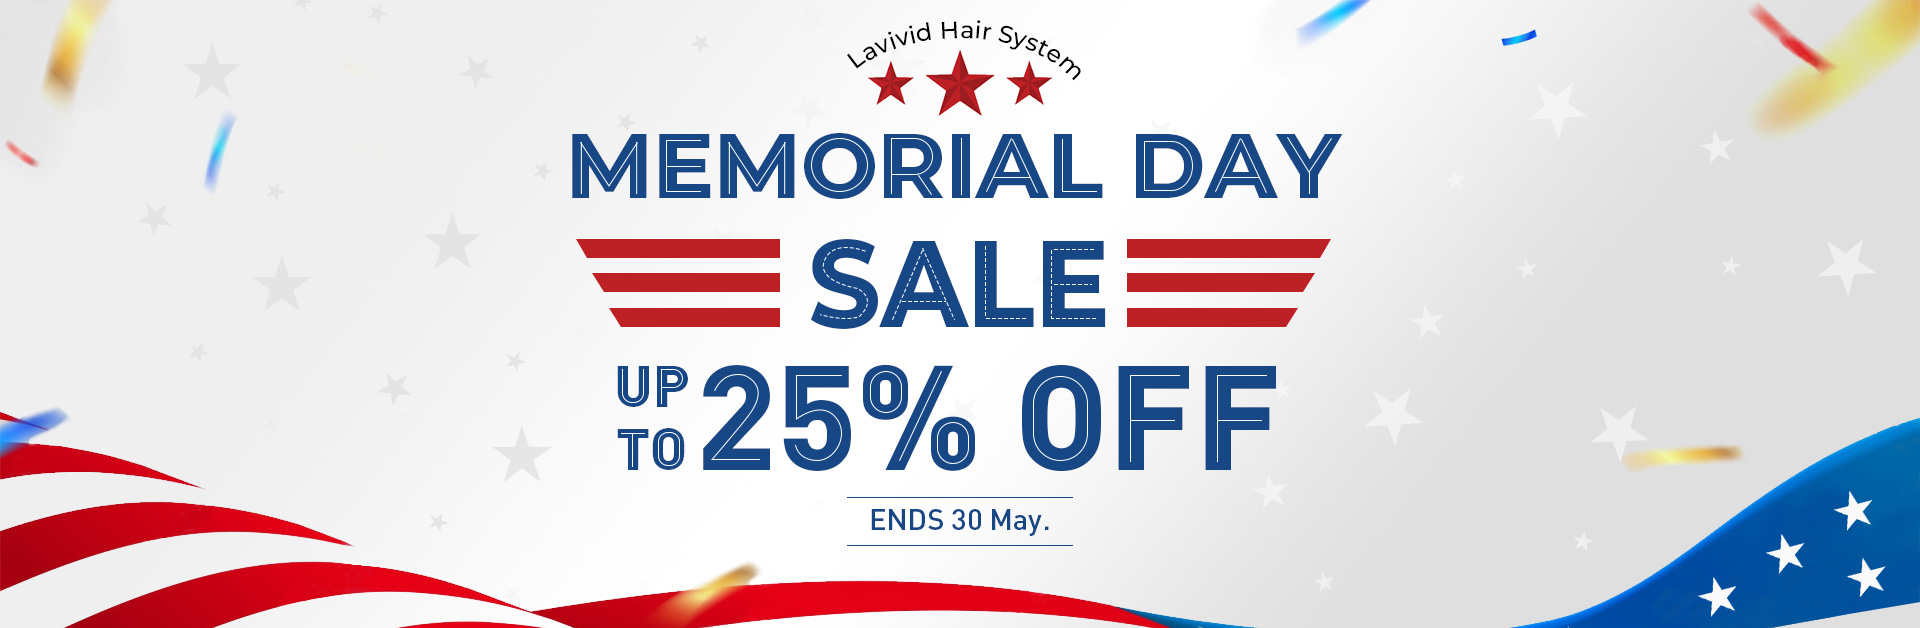 MEMORIAL DAY SALE Up to 25% OFF  ENDS 30 May.